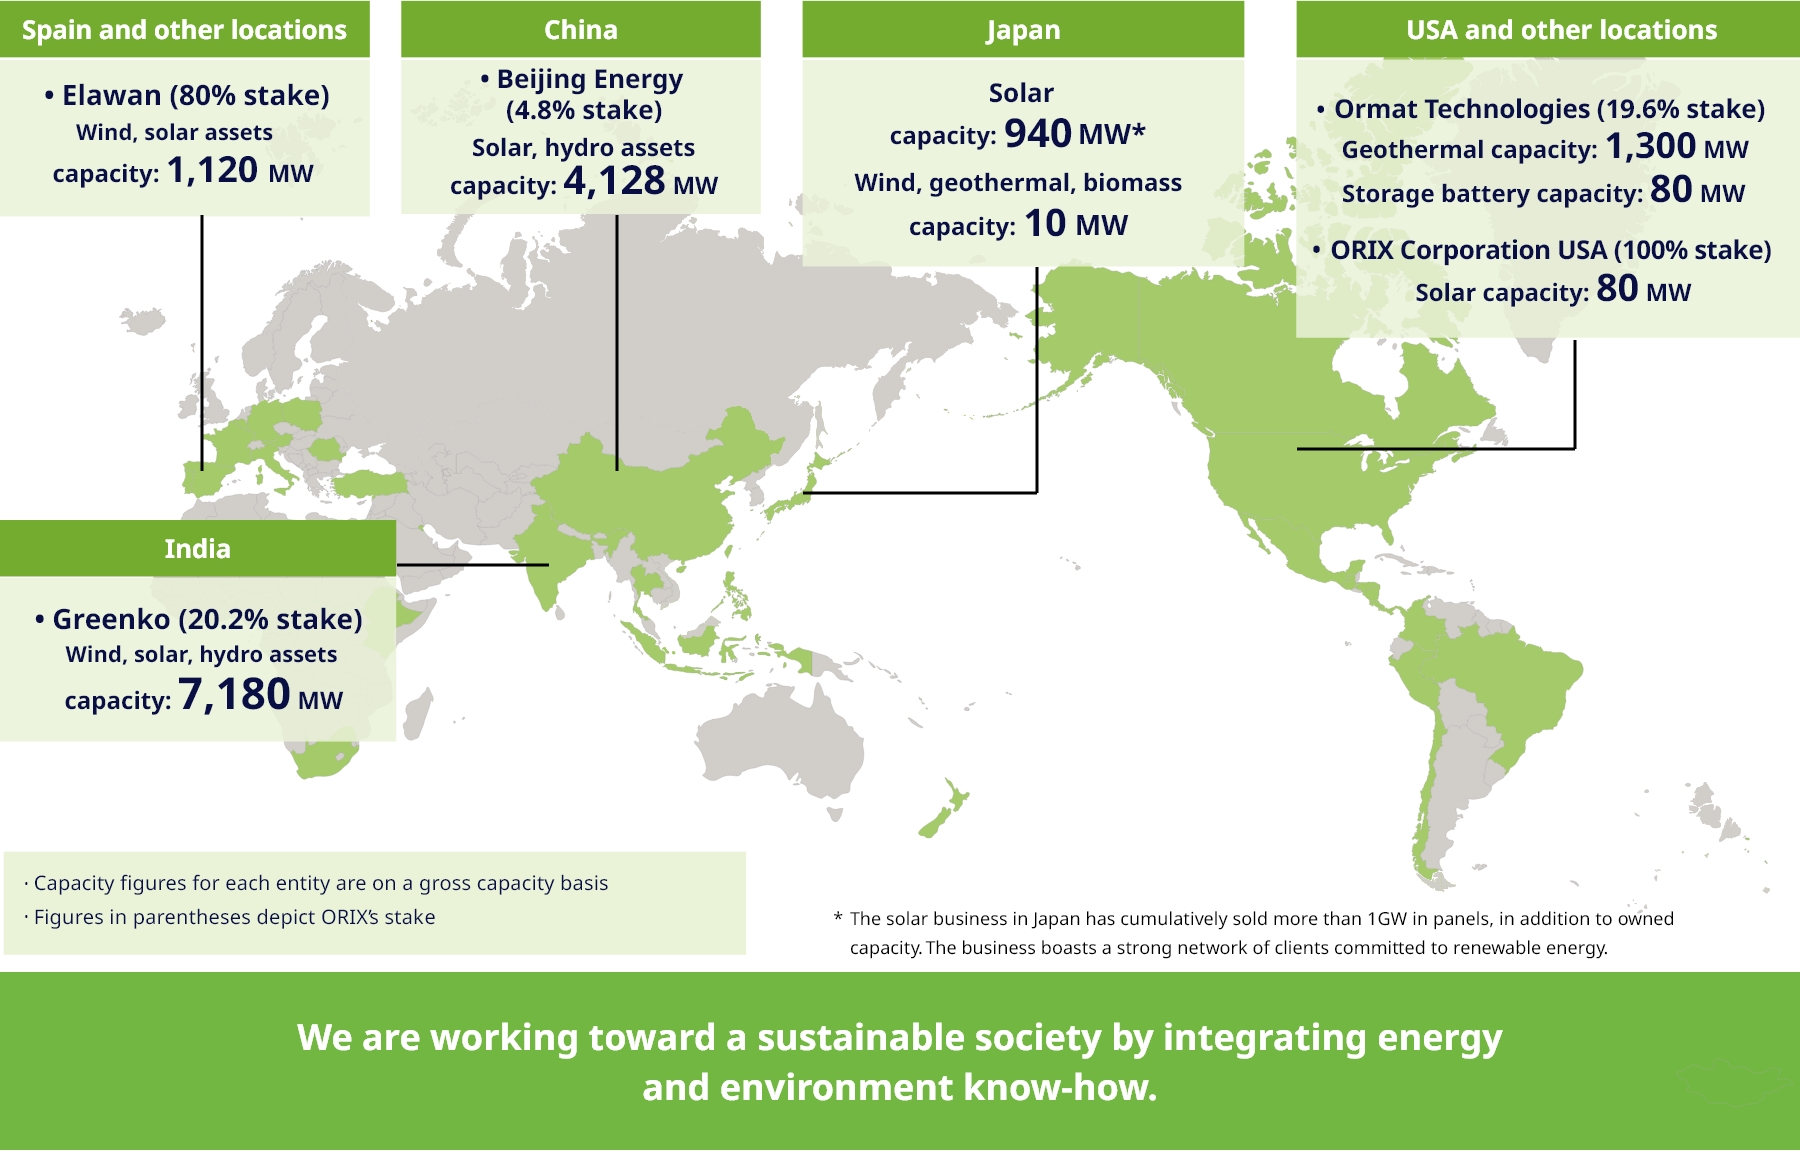 Global Expansion of the Renewable Energy Business